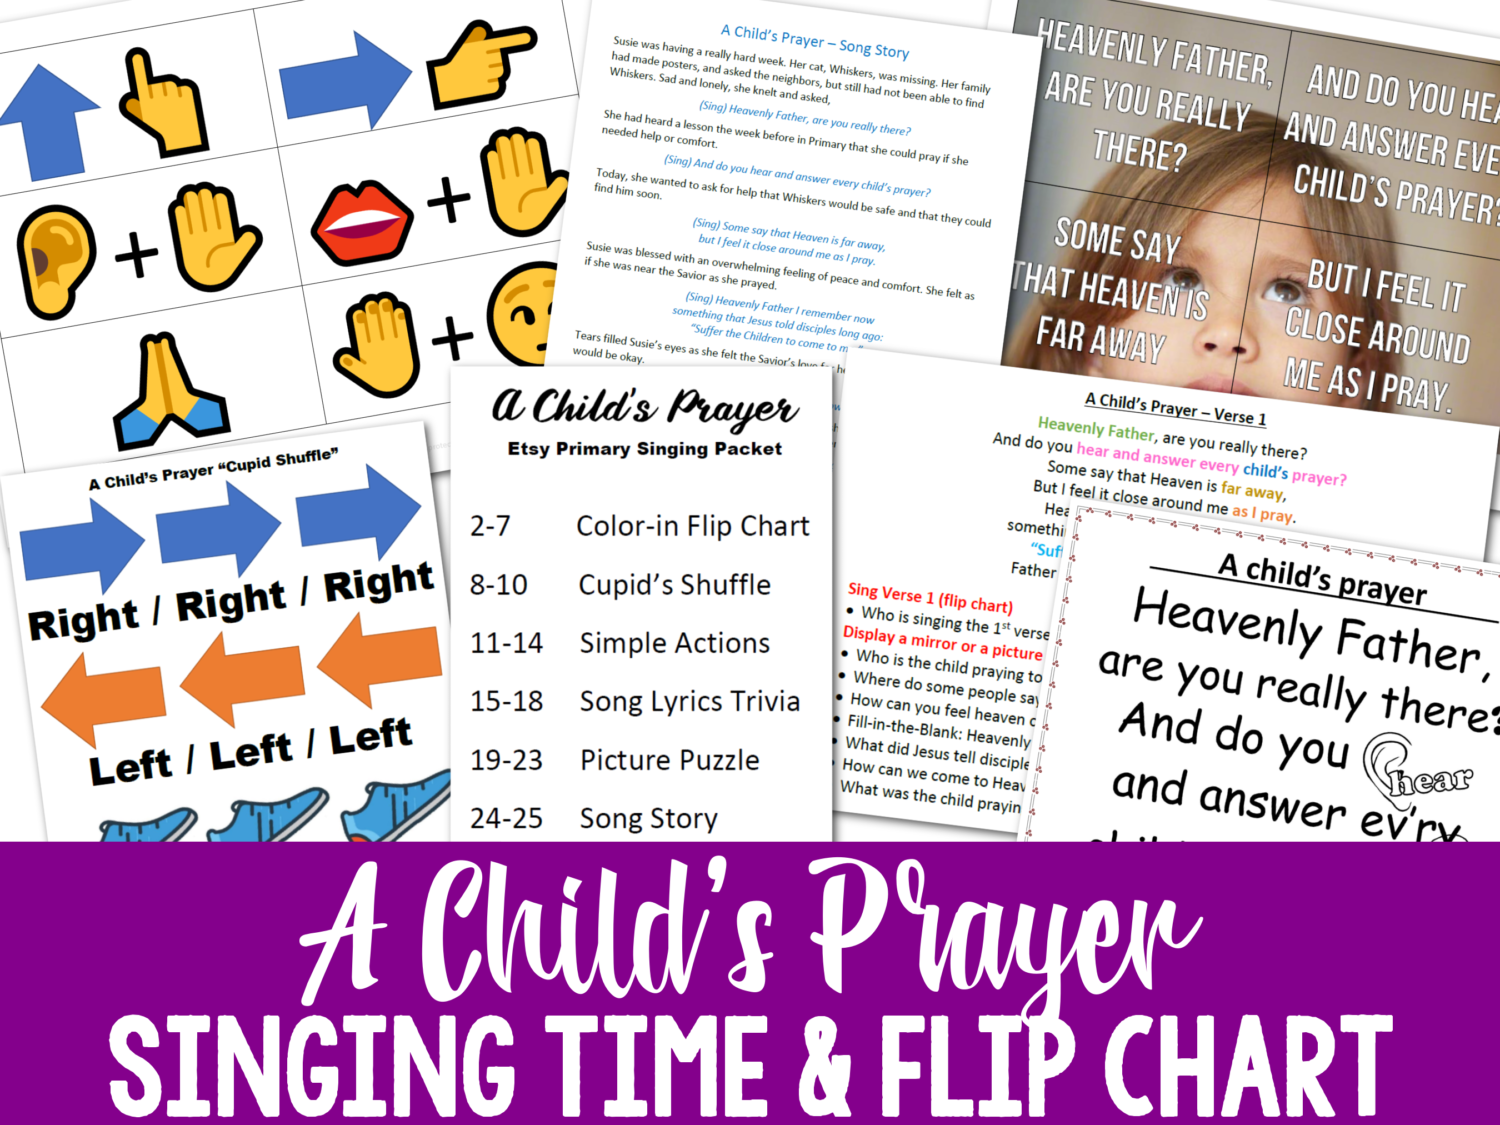 A Child's Prayer singing time and flip chart teaching packet